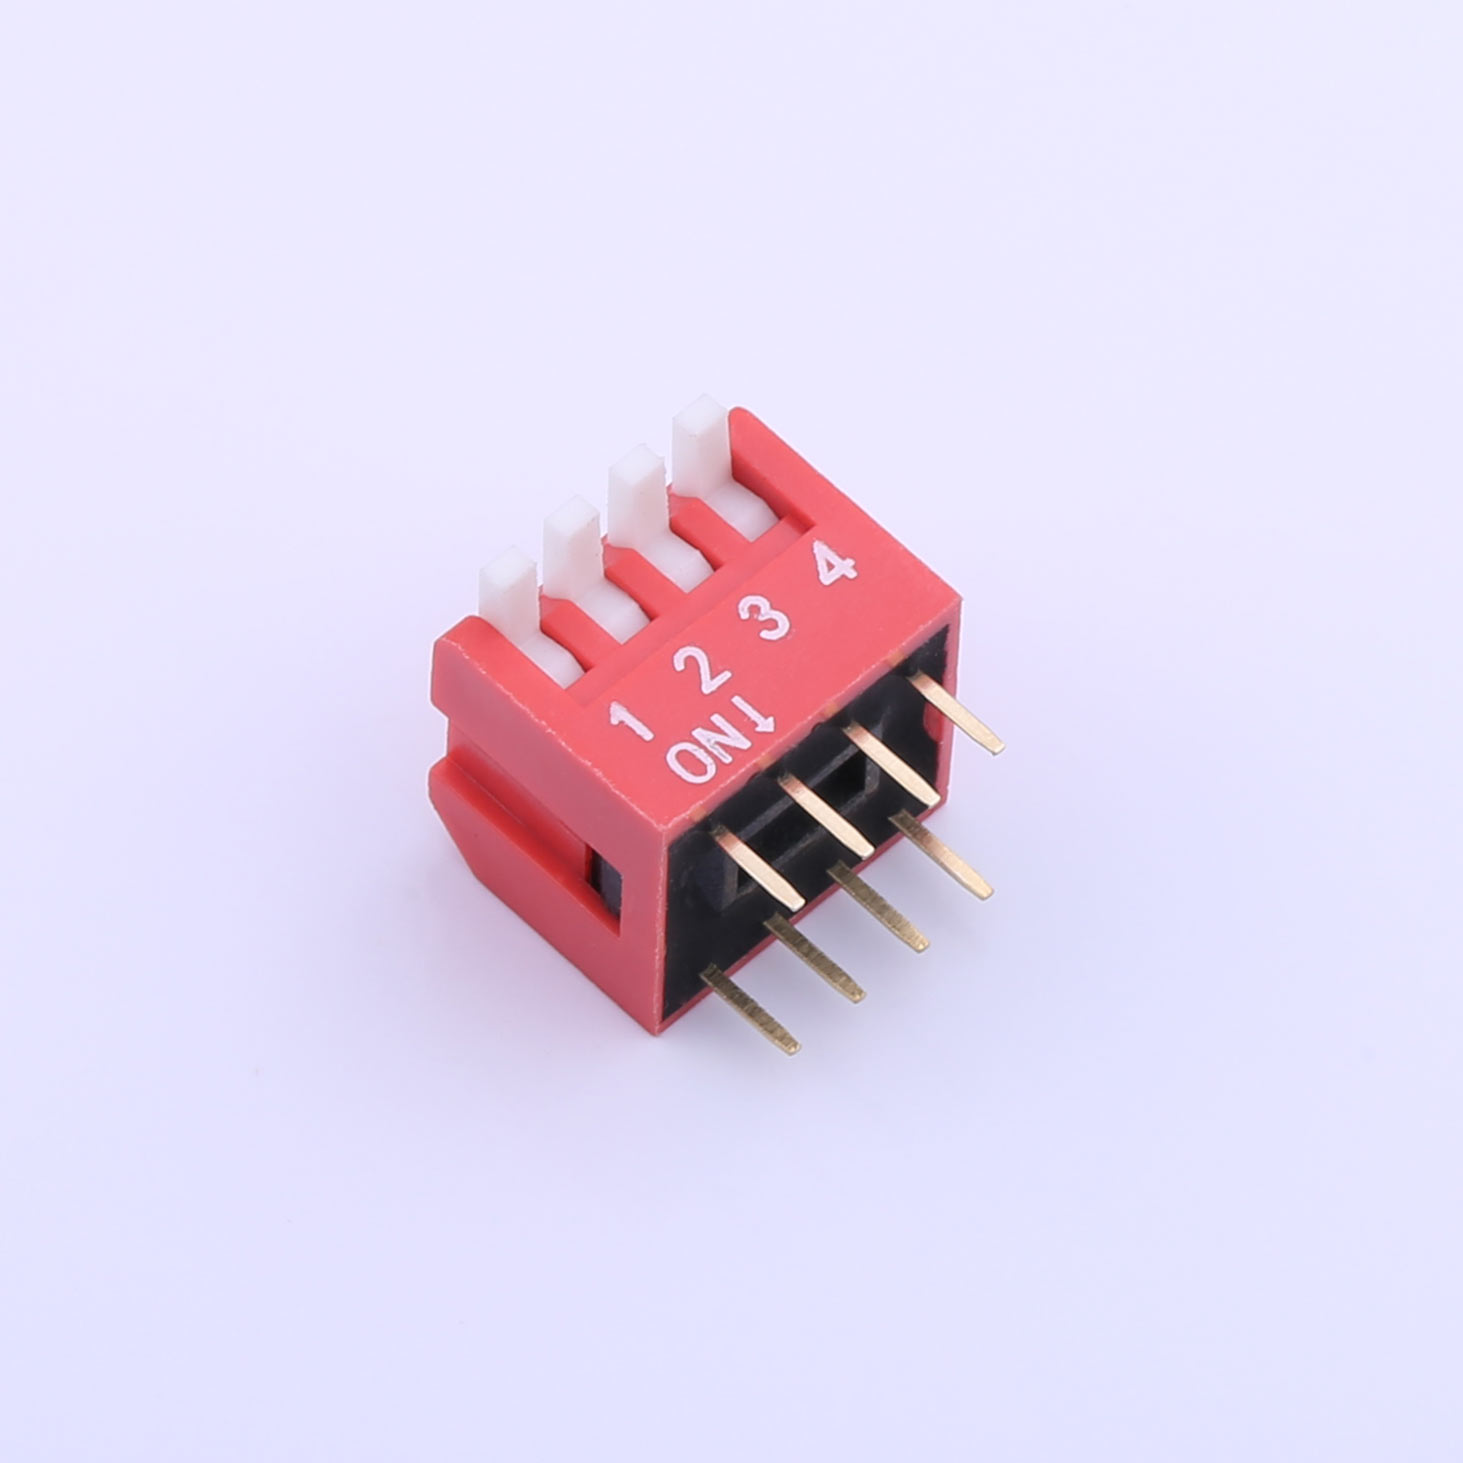 Kinghelm Pitch 2.54mm 4 Positions Red Dip Switch 100mA 24V - KH-1002-CB2.54-4P